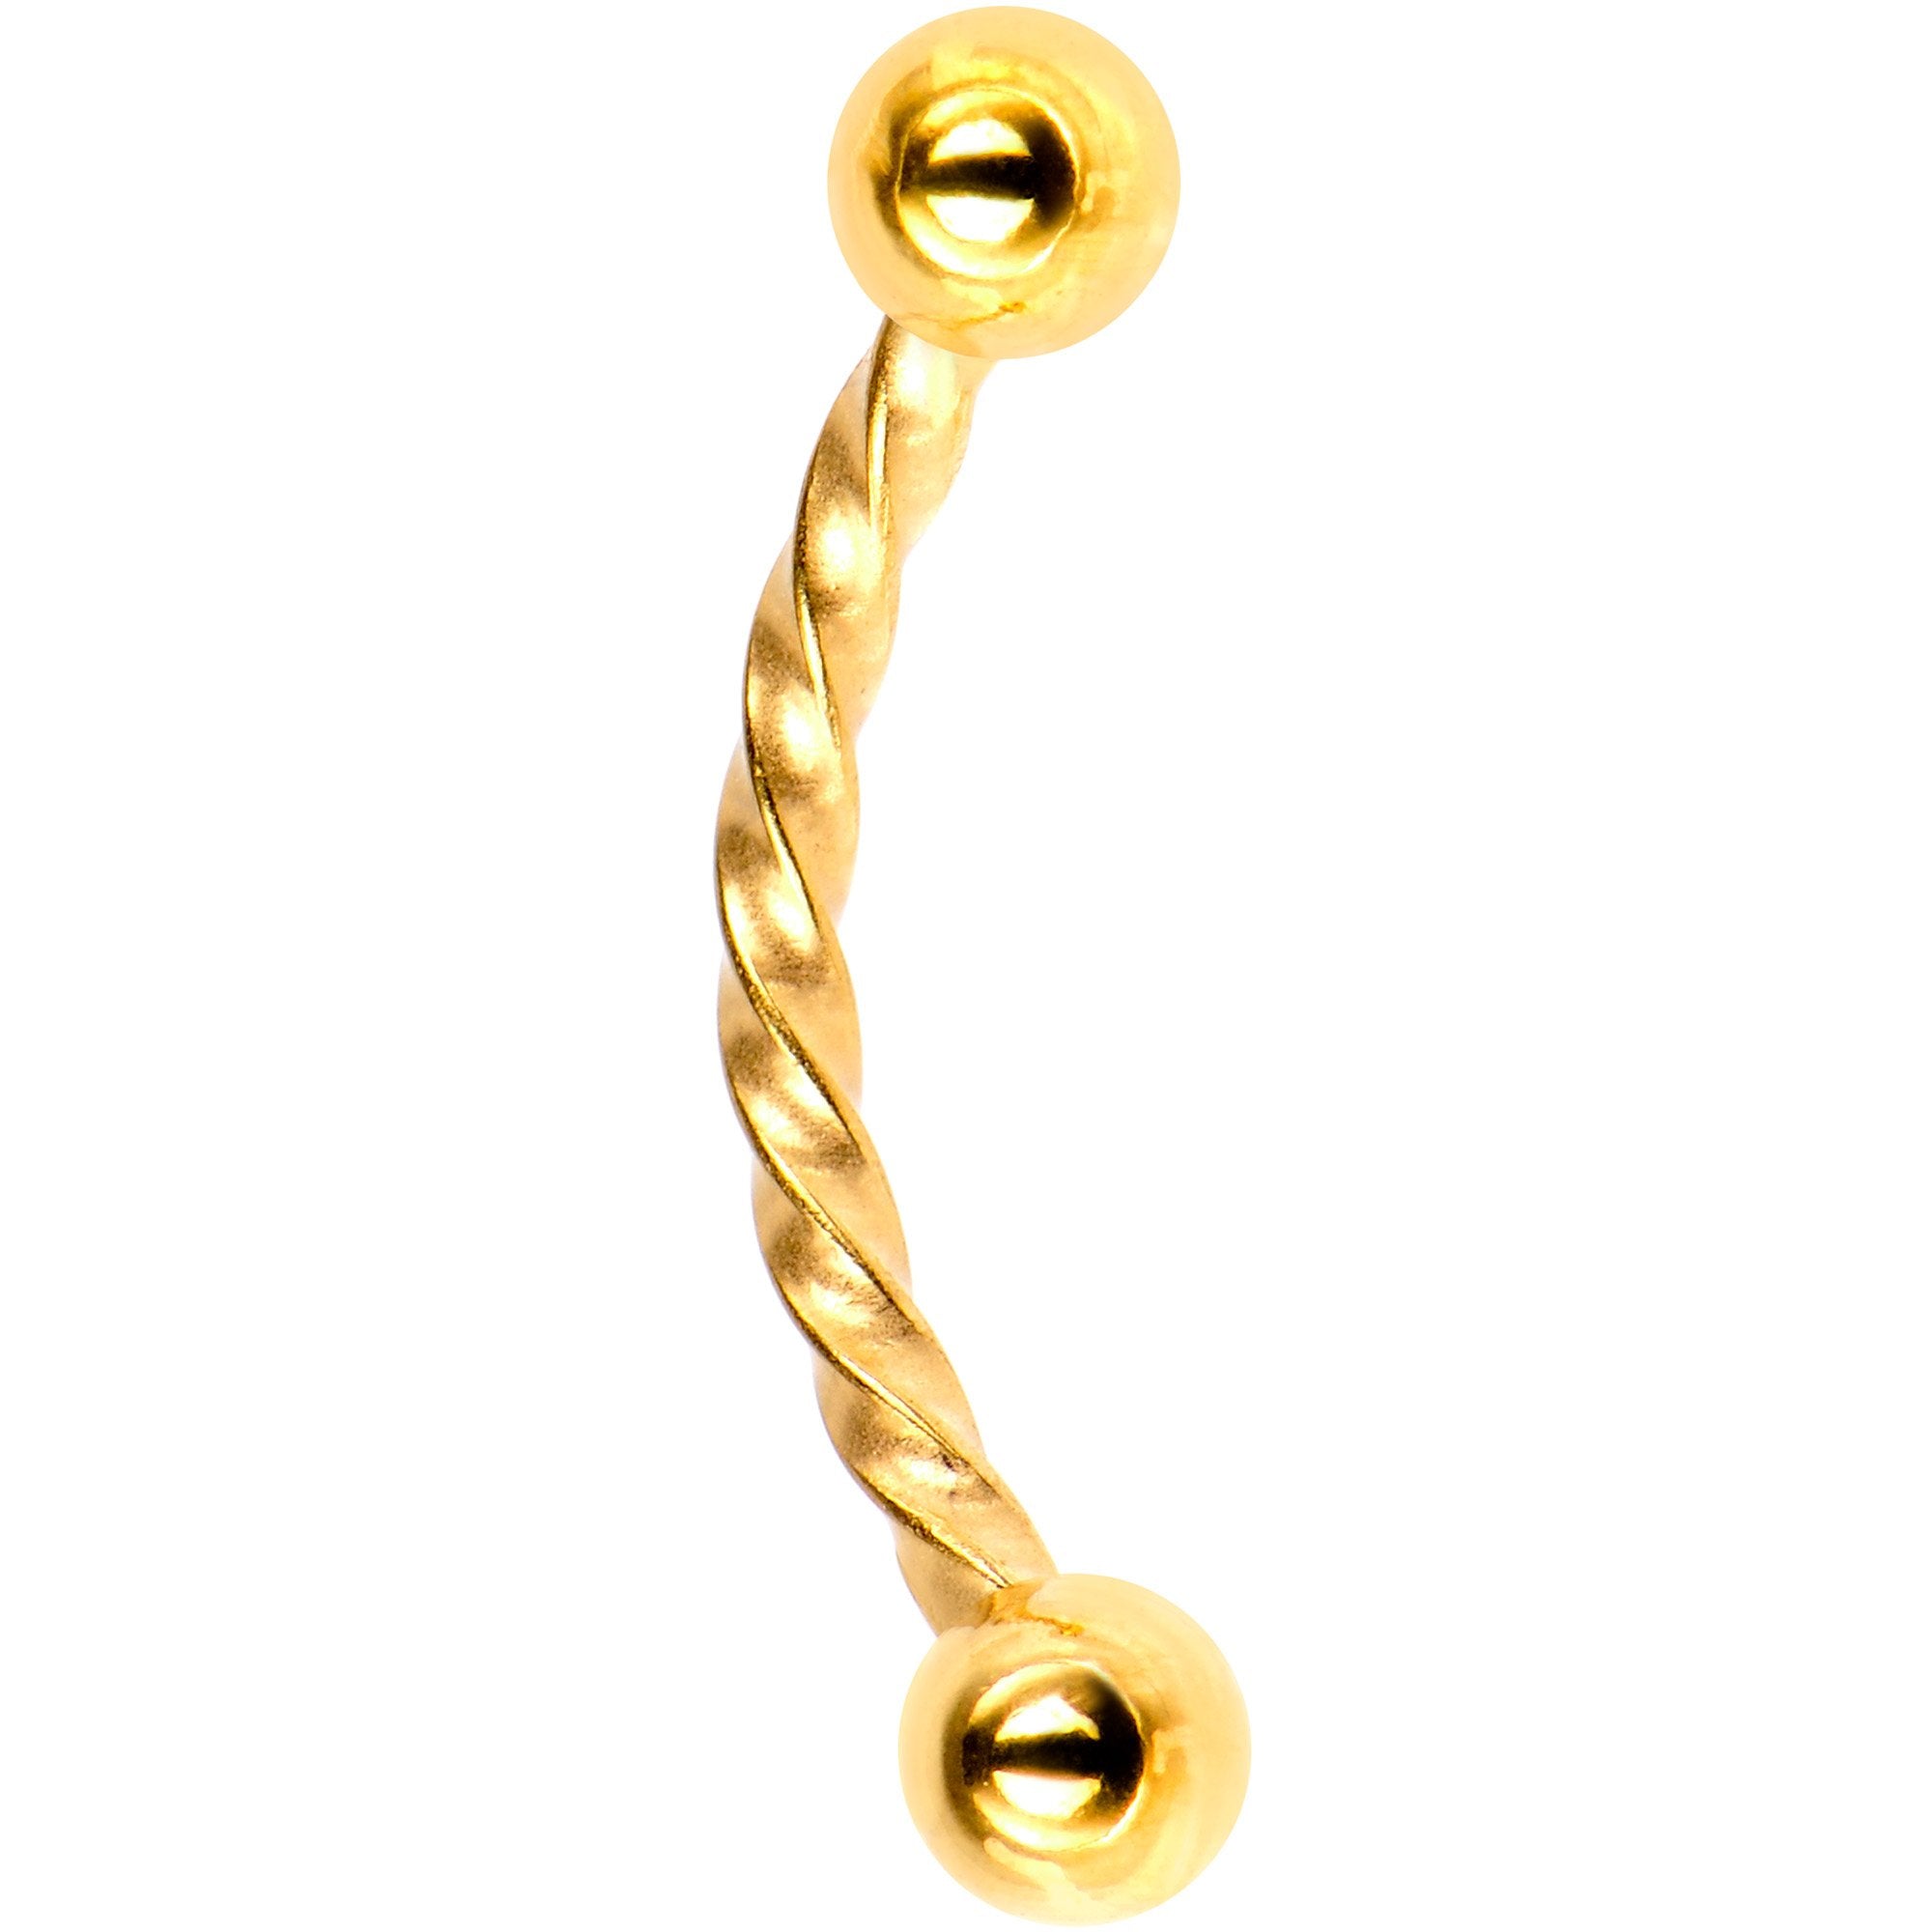 16 Gauge 3/8 Gold Tone IP Seriously Twisted Curved Eyebrow Ring